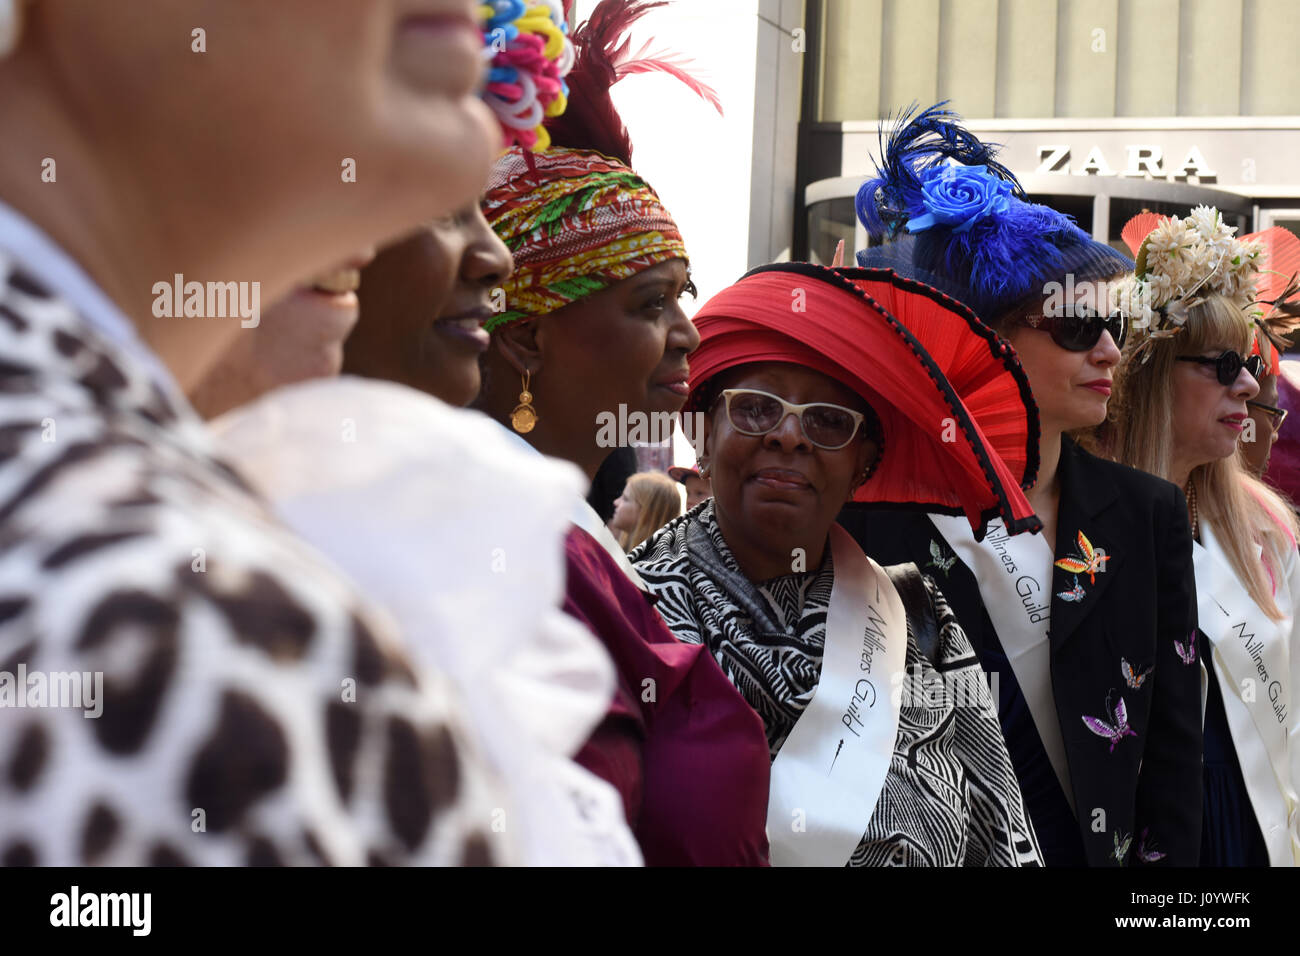 The parade is a New York tradition dating back to the mid-1800's when the social elite would parade their new fashions down Fifth Avenue after attending Easter services in one of the Fifth Avenue churches. (Photo by: Joana Toro/Pacific Press) Stock Photo